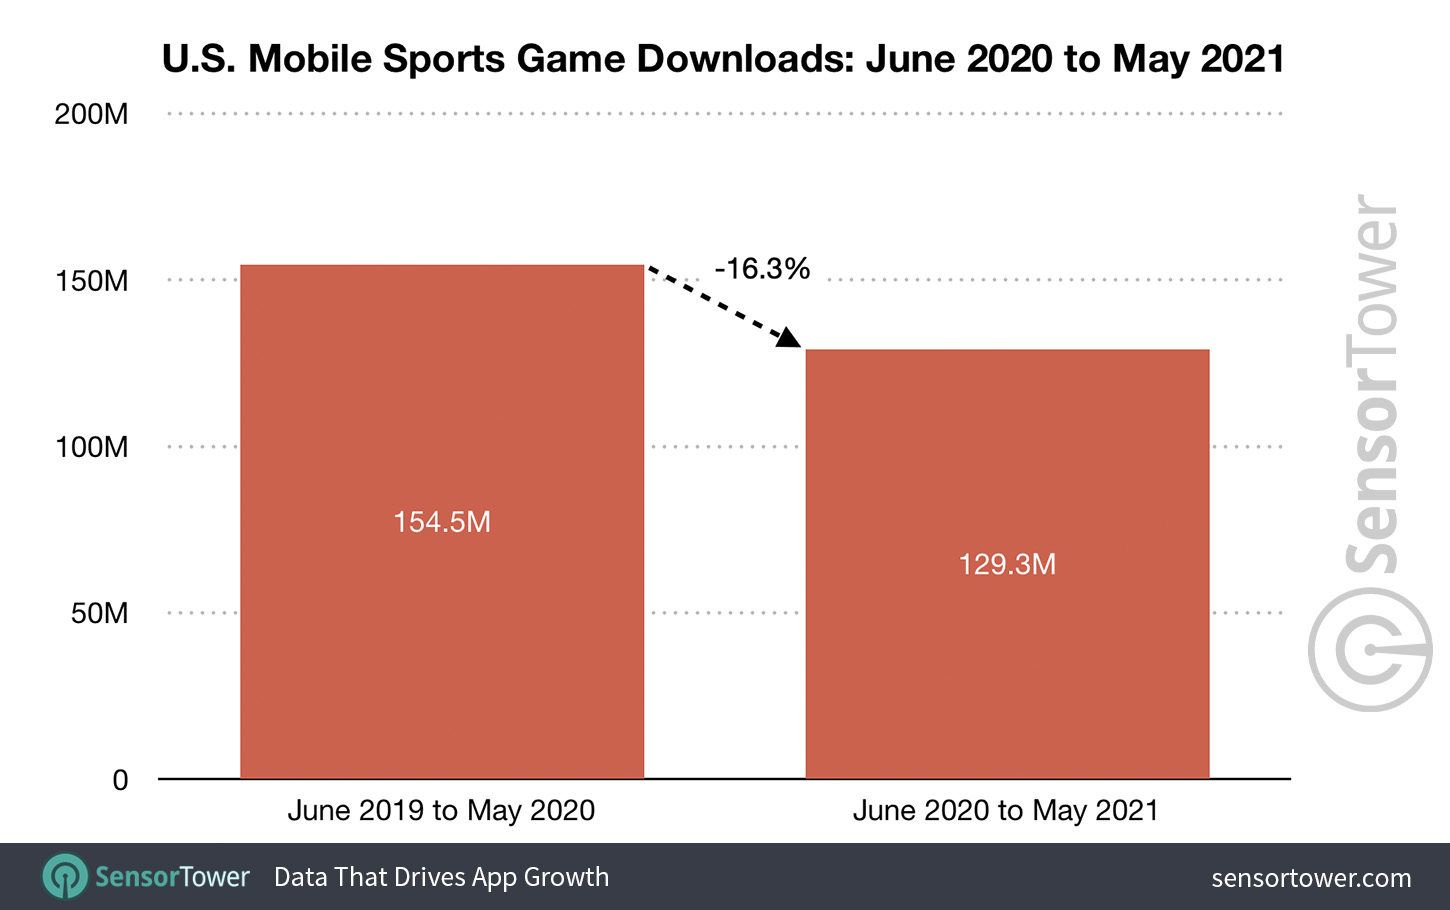 U.S. Mobile Sports Game Downloads: June 1, 2020 and May 31, 2021